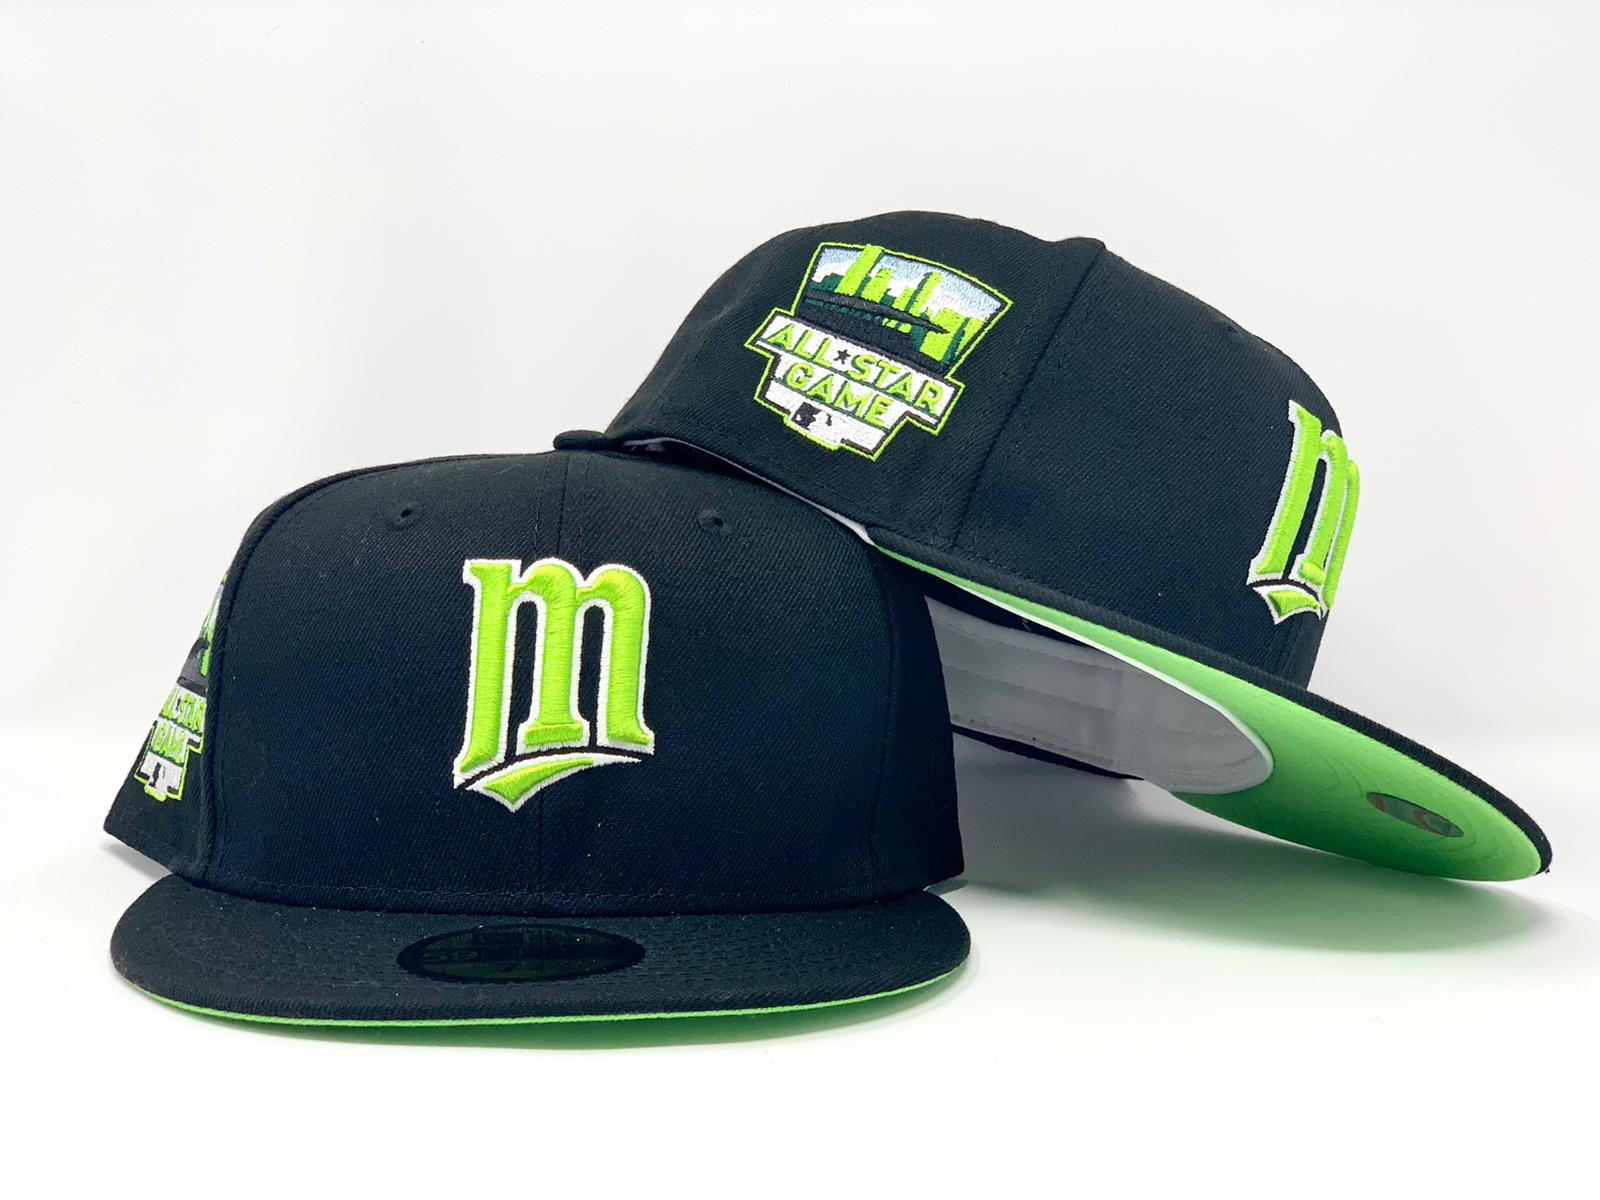 Check out 2014 All-Star Game hats